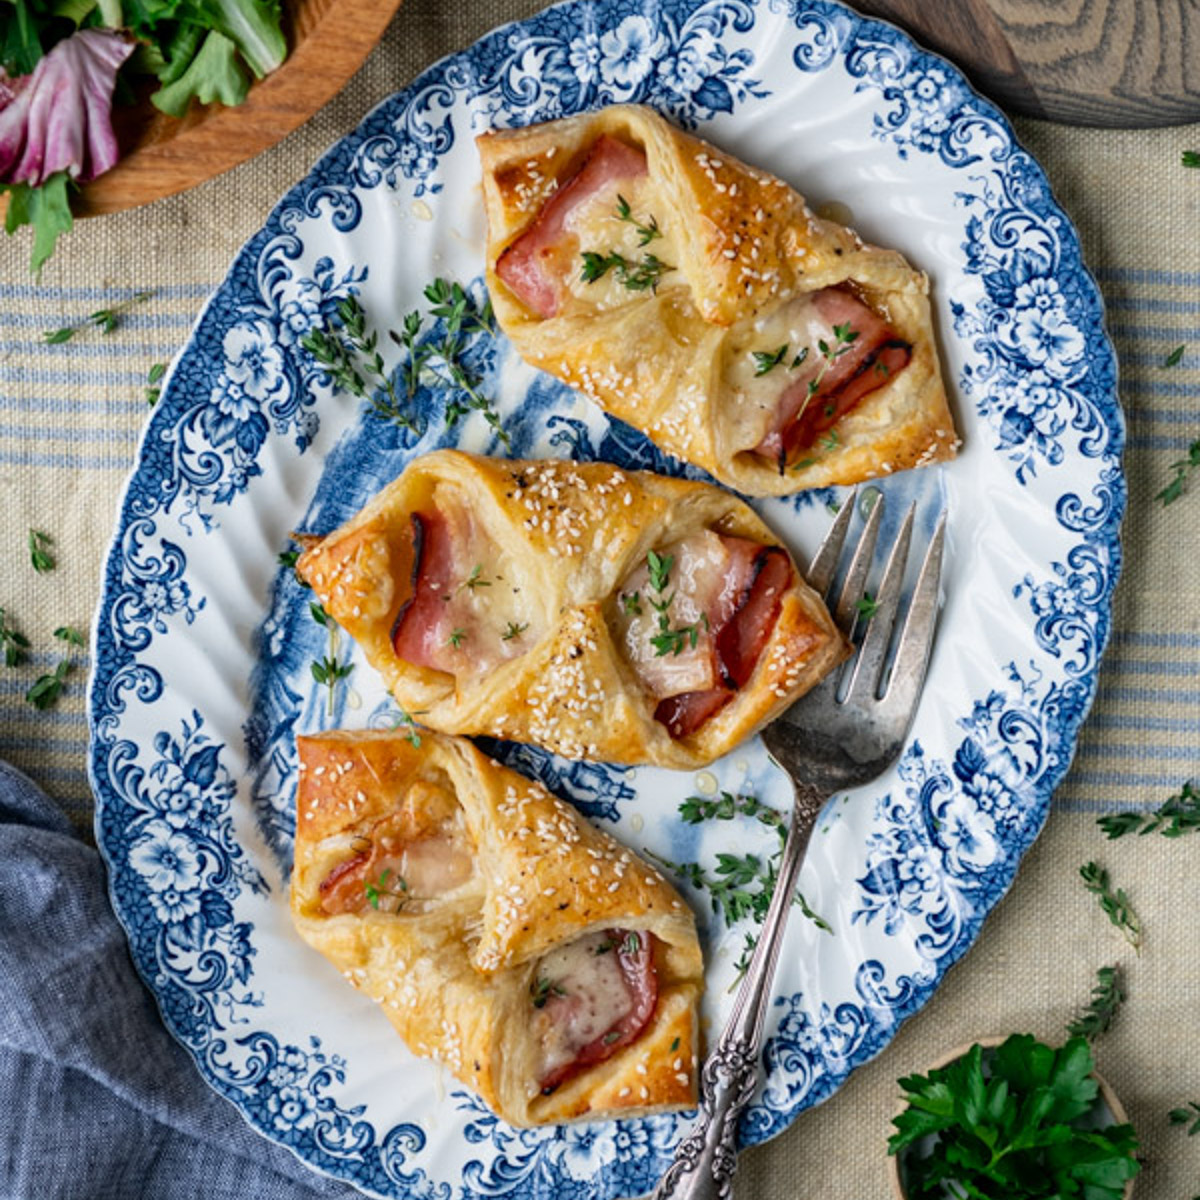 https://www.theseasonedmom.com/wp-content/uploads/2022/07/Puff-Pastry-Ham-and-Cheese-Hot-Pockets-Featured.jpg